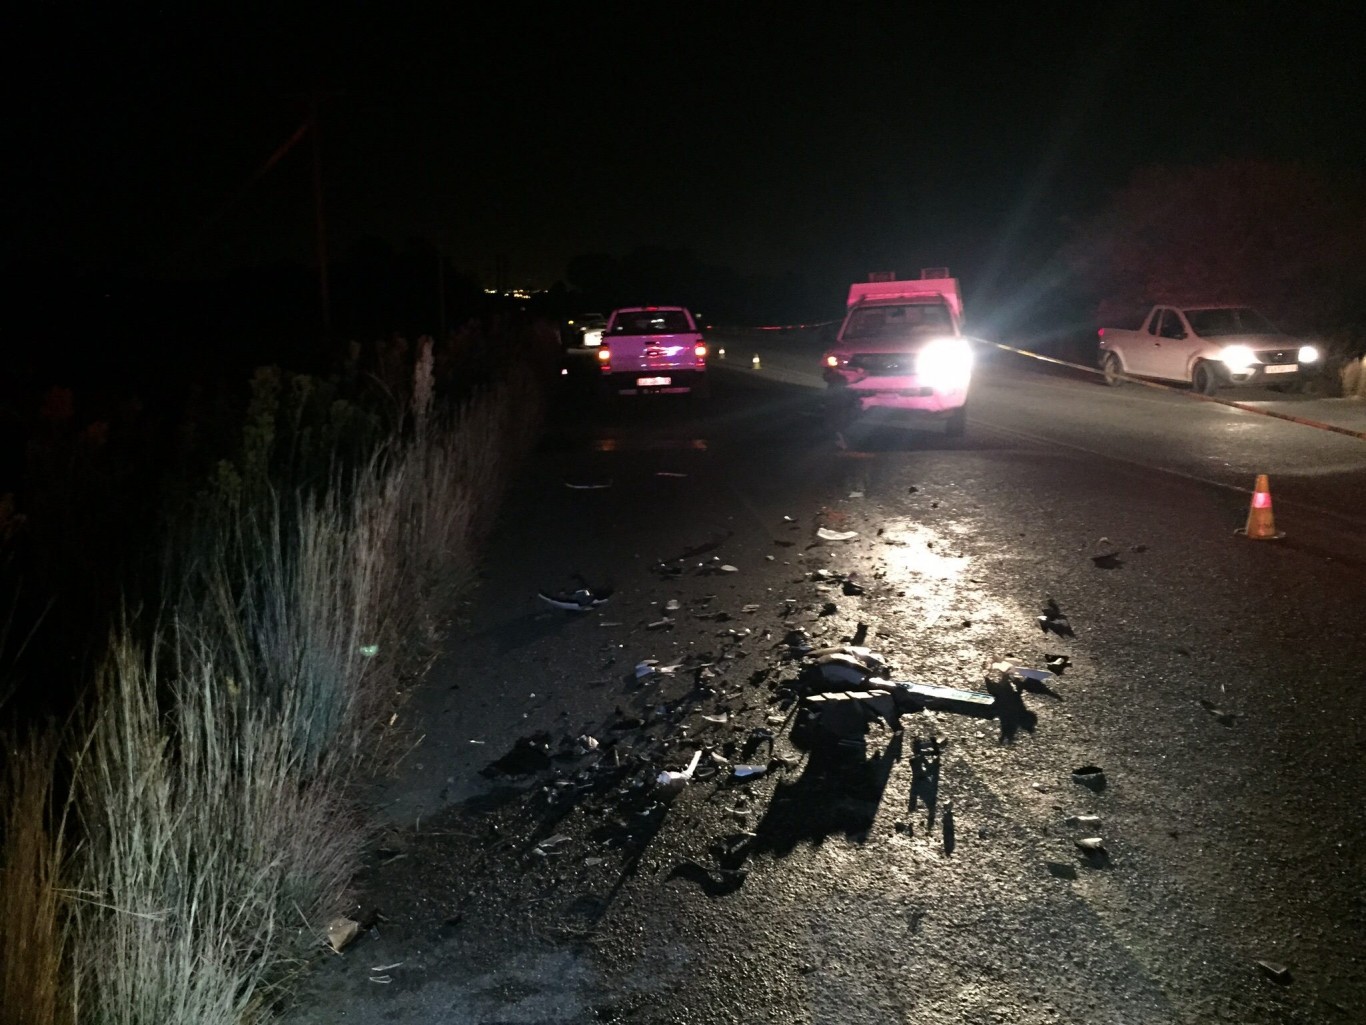 Pedestrian vehicle crash on the R64 about 10km outside Bloemfontein